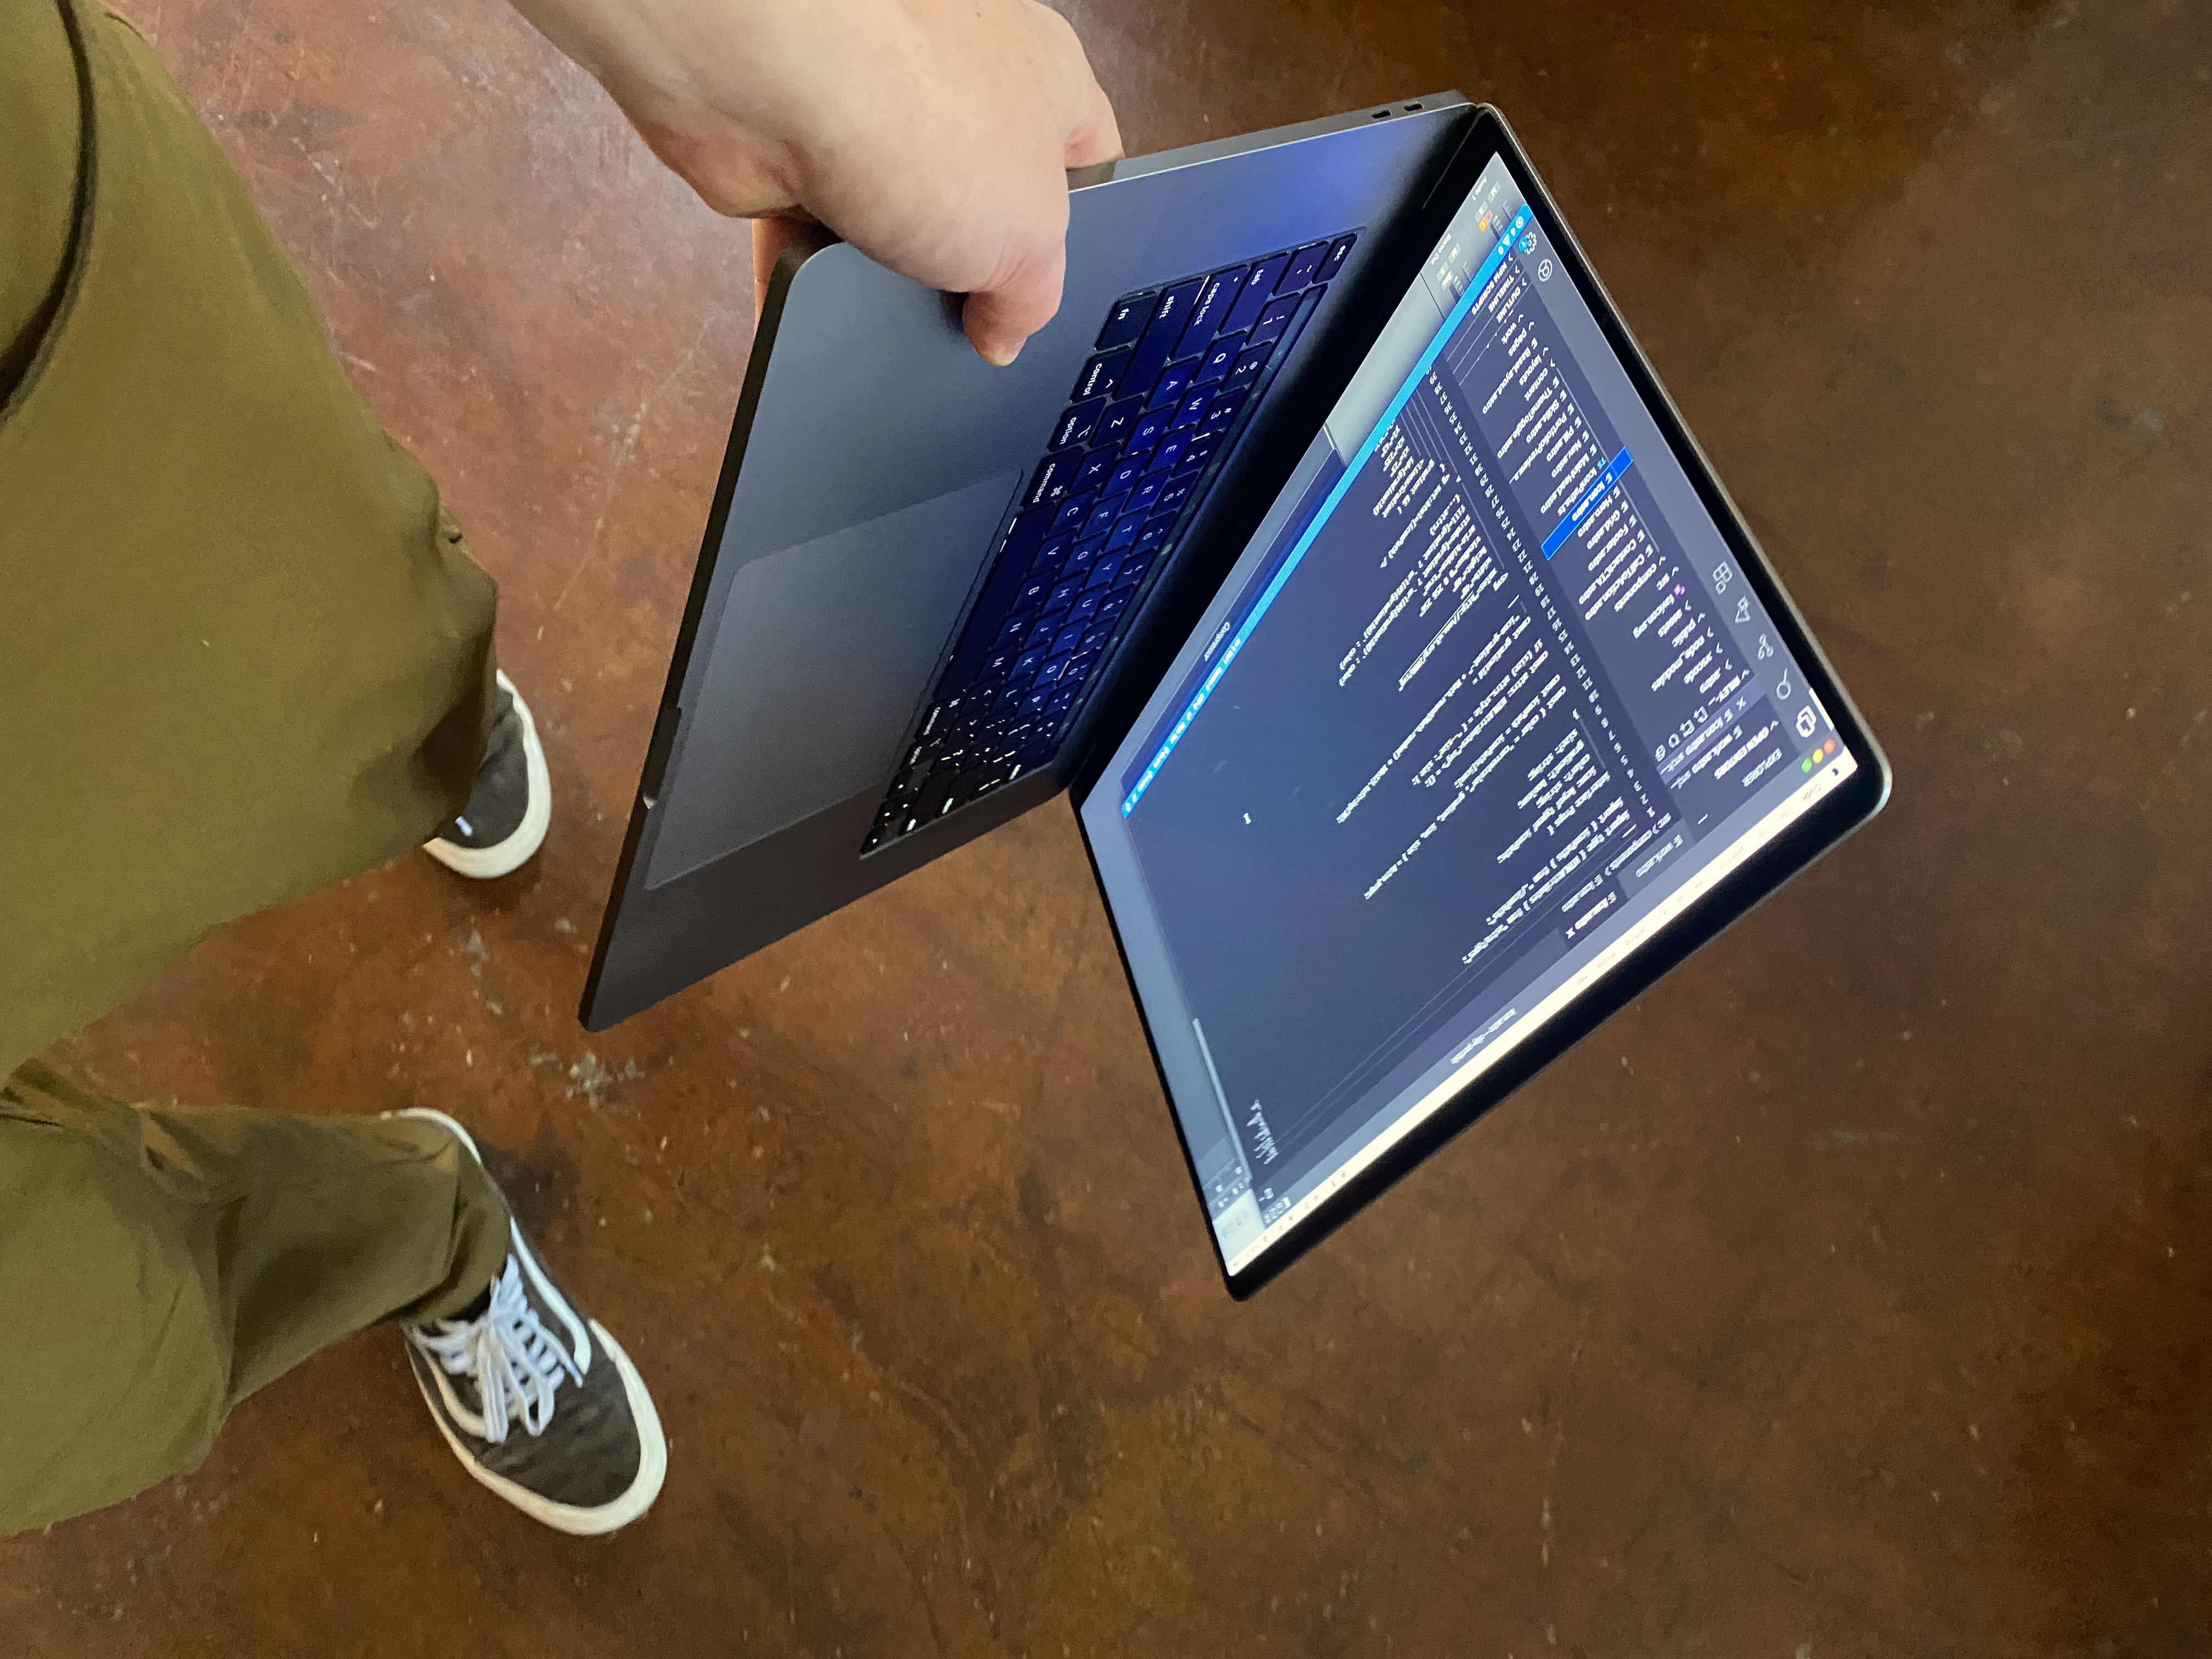 This is how devs carry their laptops